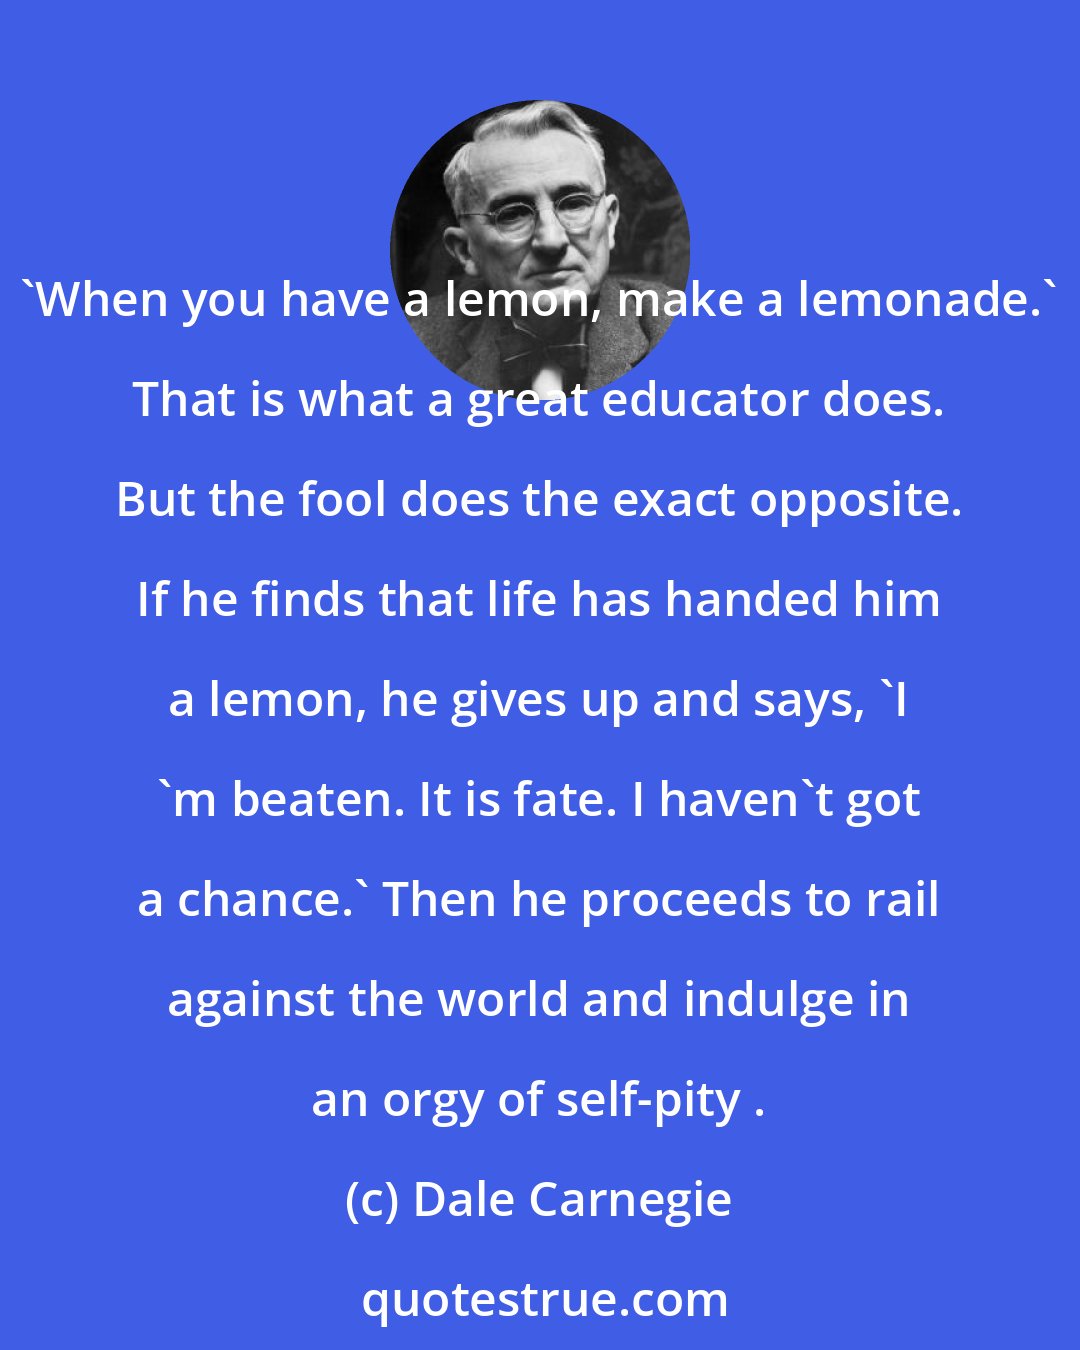 Dale Carnegie: 'When you have a lemon, make a lemonade.' That is what a great educator does. But the fool does the exact opposite. If he finds that life has handed him a lemon, he gives up and says, 'I 'm beaten. It is fate. I haven't got a chance.' Then he proceeds to rail against the world and indulge in an orgy of self-pity .